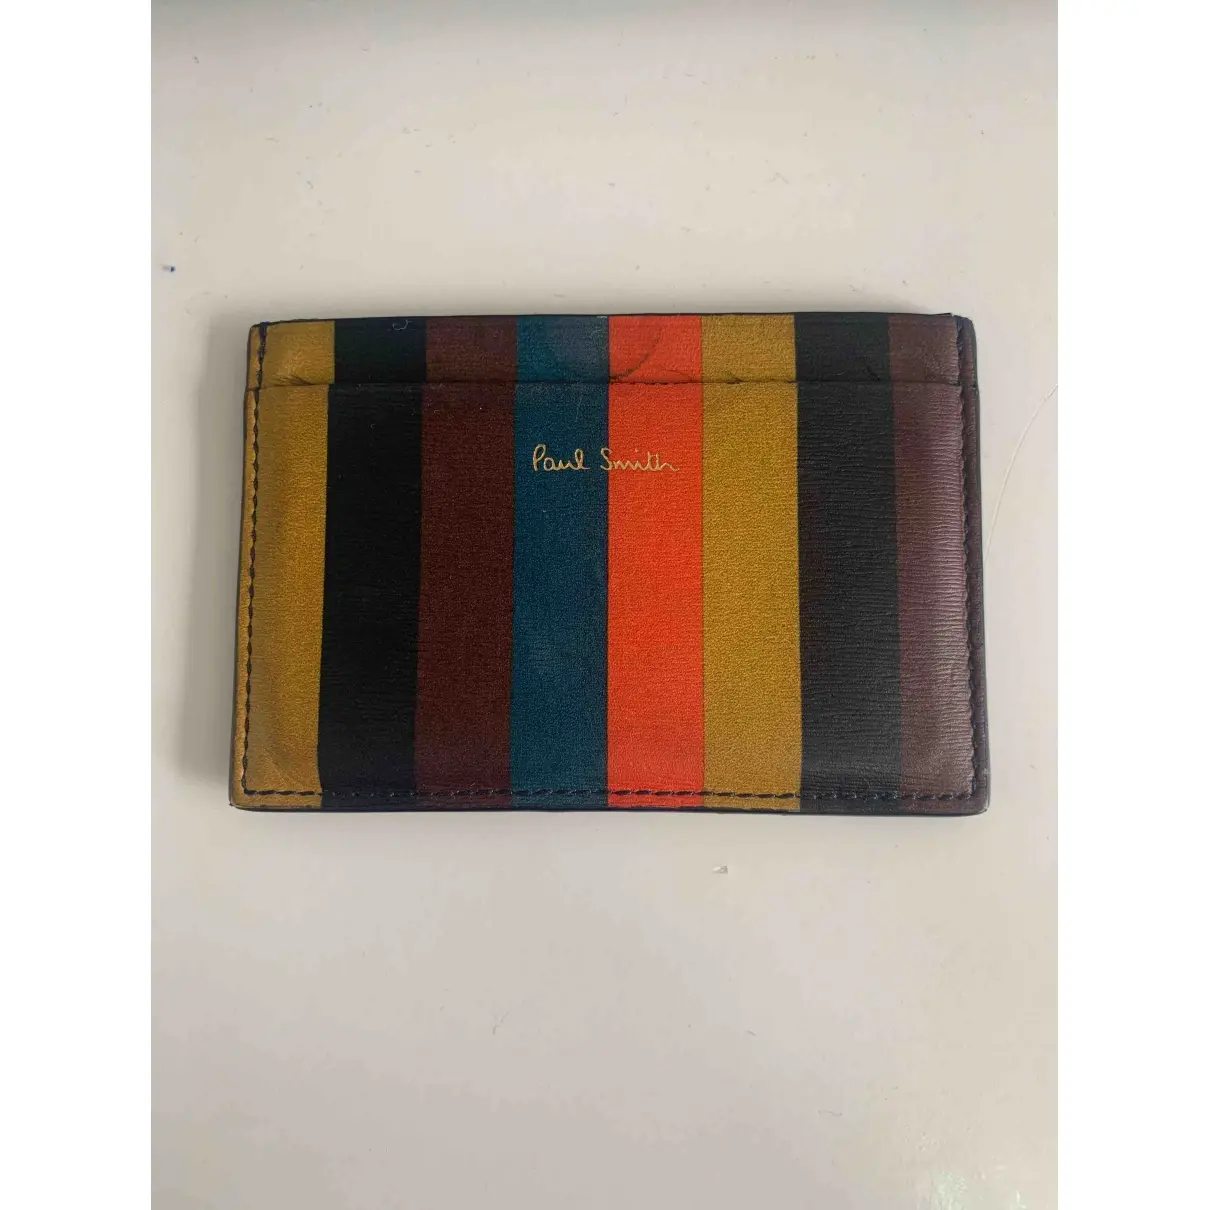 Paul Smith Leather small bag for sale